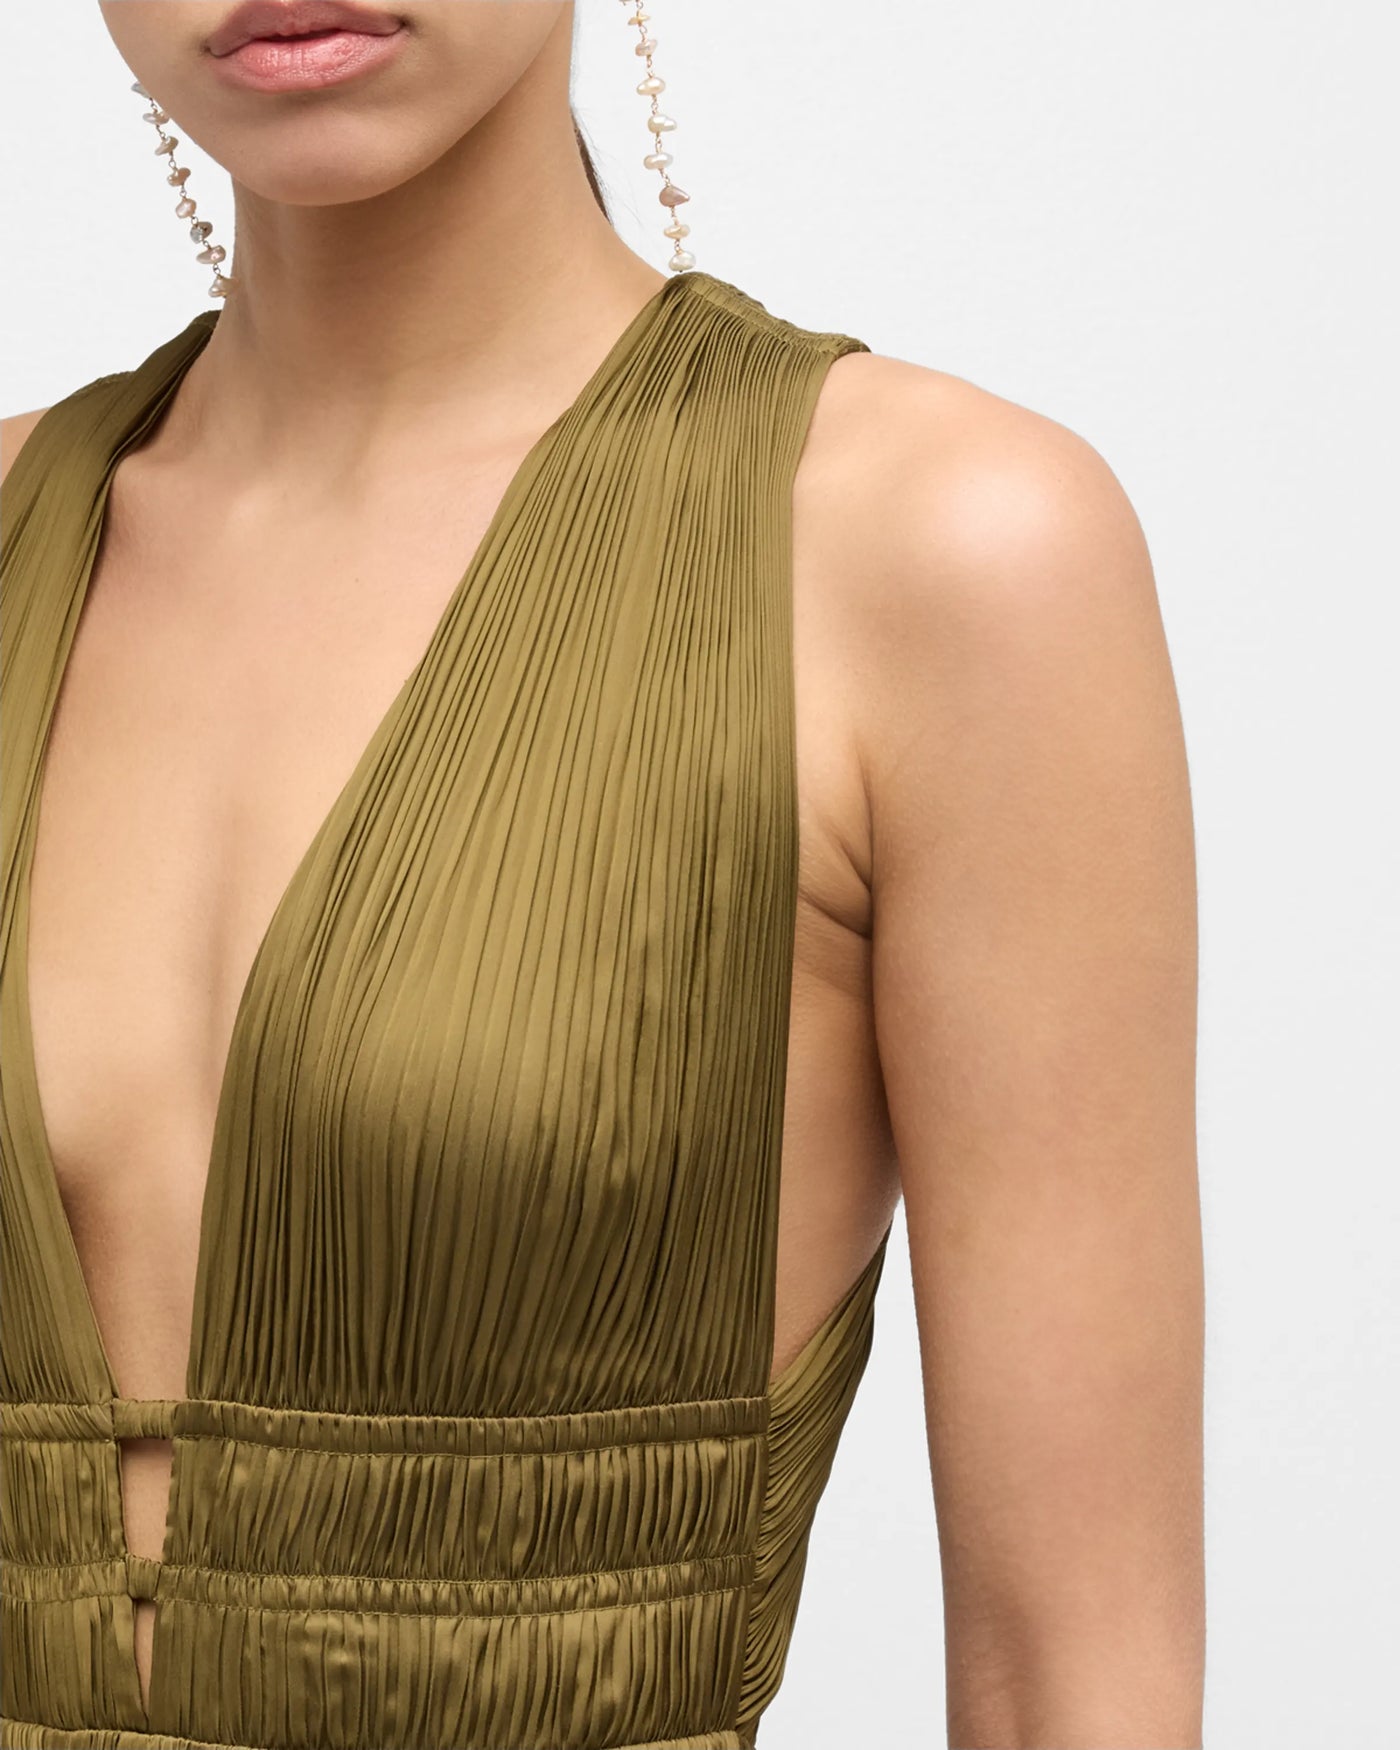 VEDA GOWN IN OLIVE - Romi Boutique